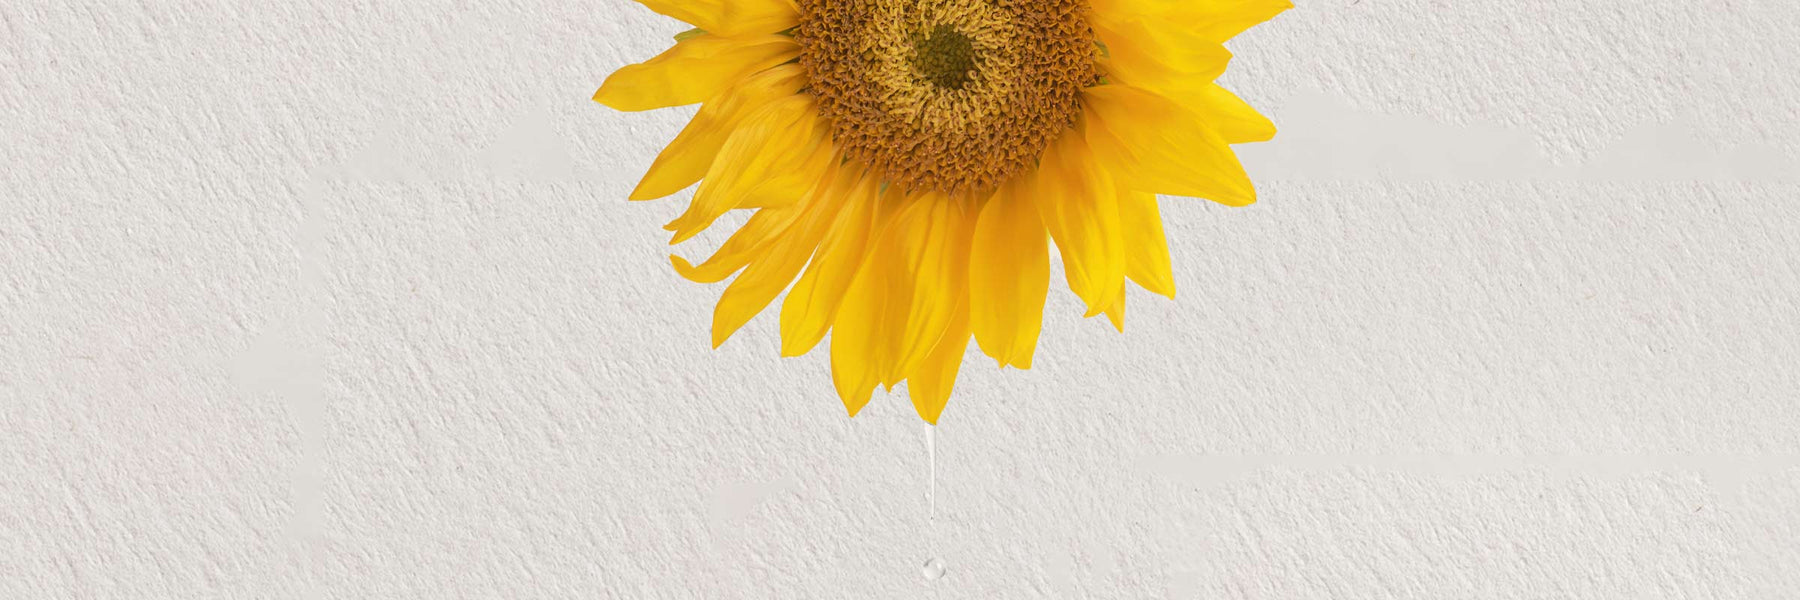 Sunflower Oil for Skin: 10 Benefits, How to Use